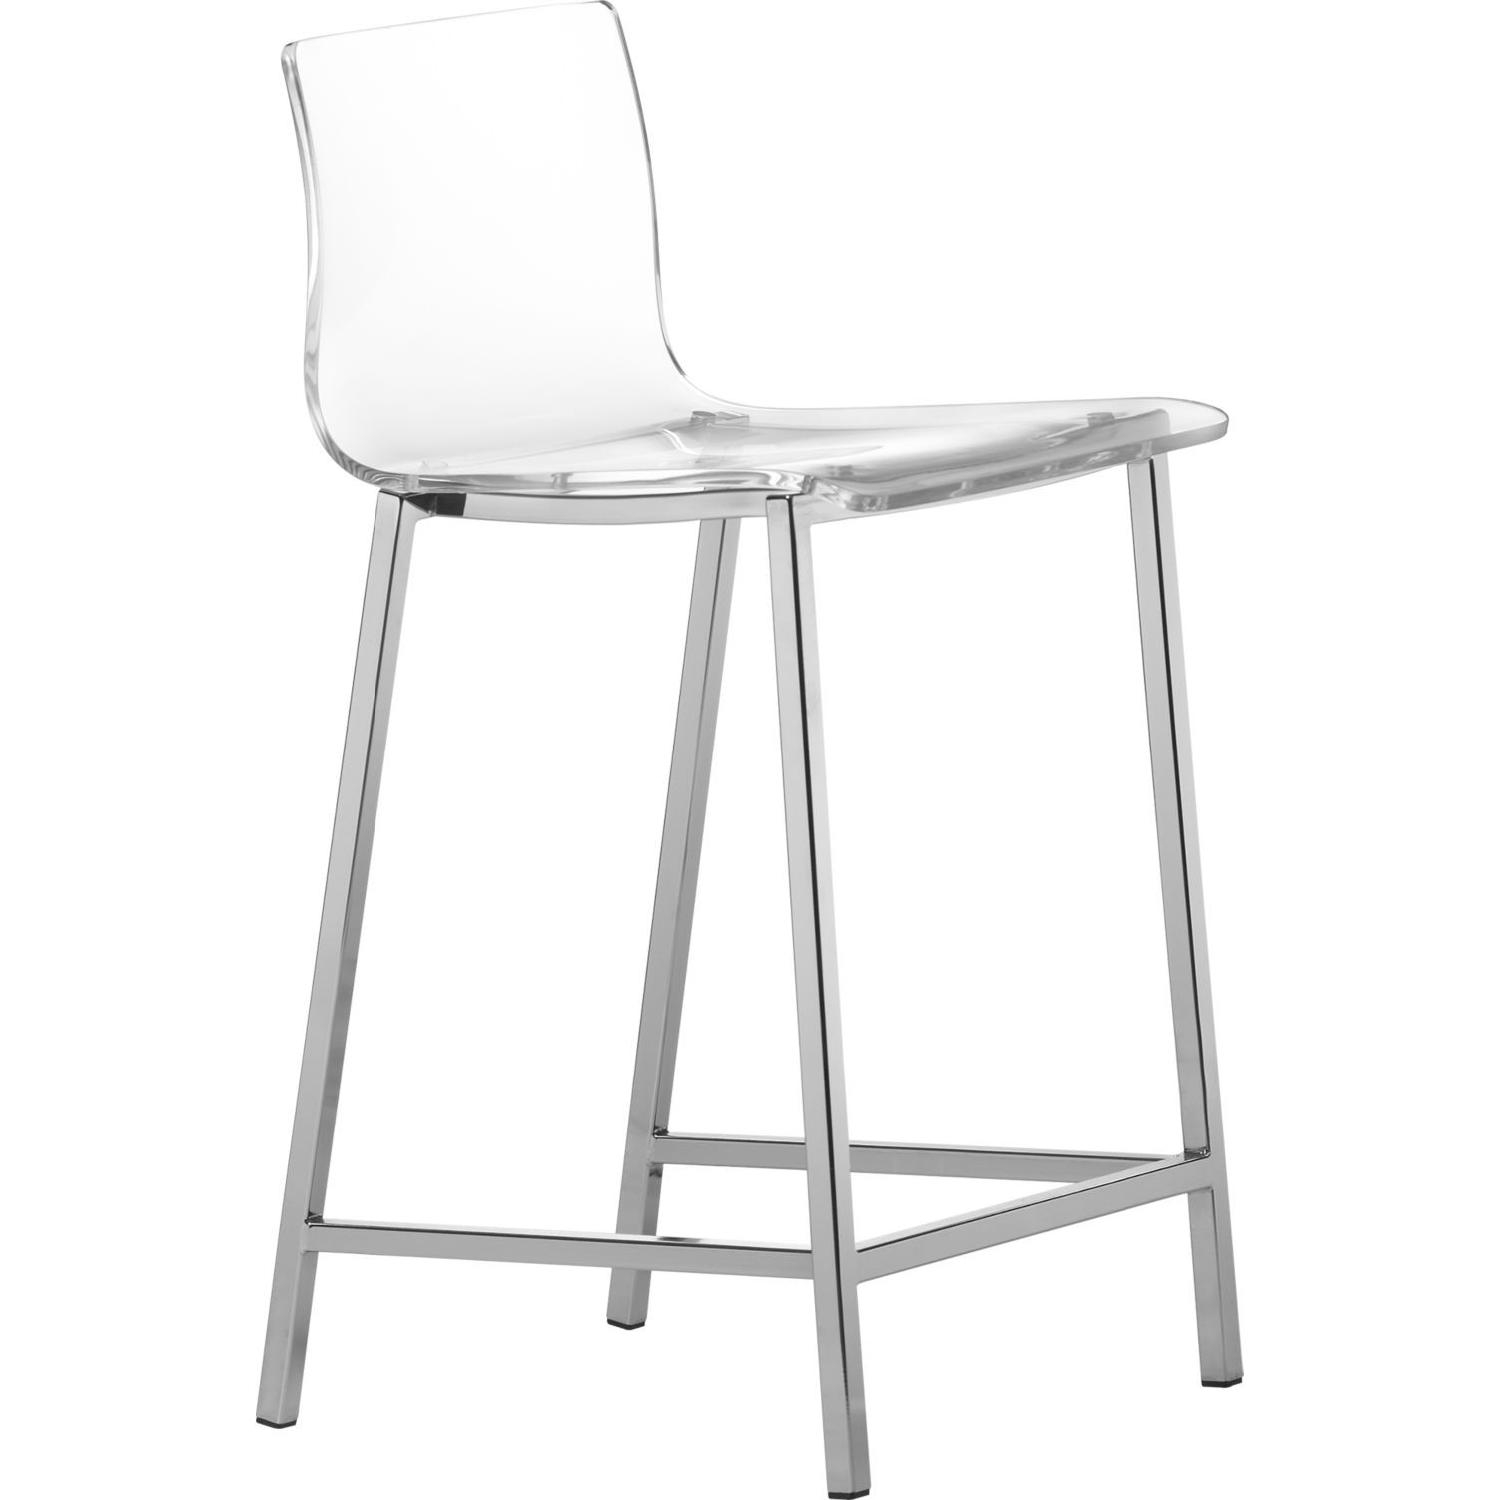 Ghost bar stools counter height